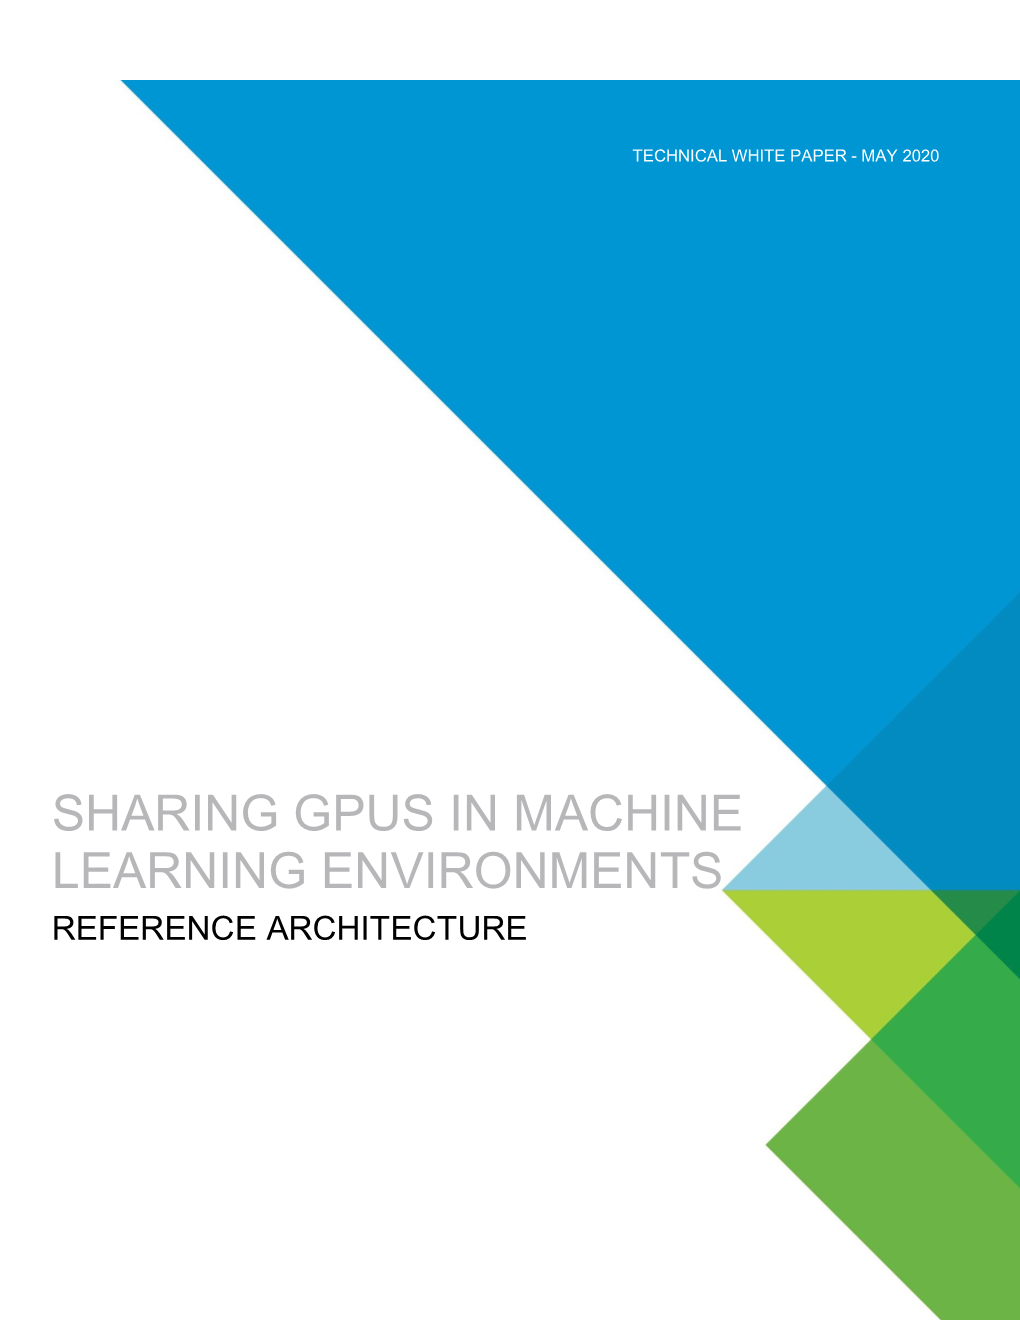 Sharing Gpus in Machine Learning Environments Reference Architecture